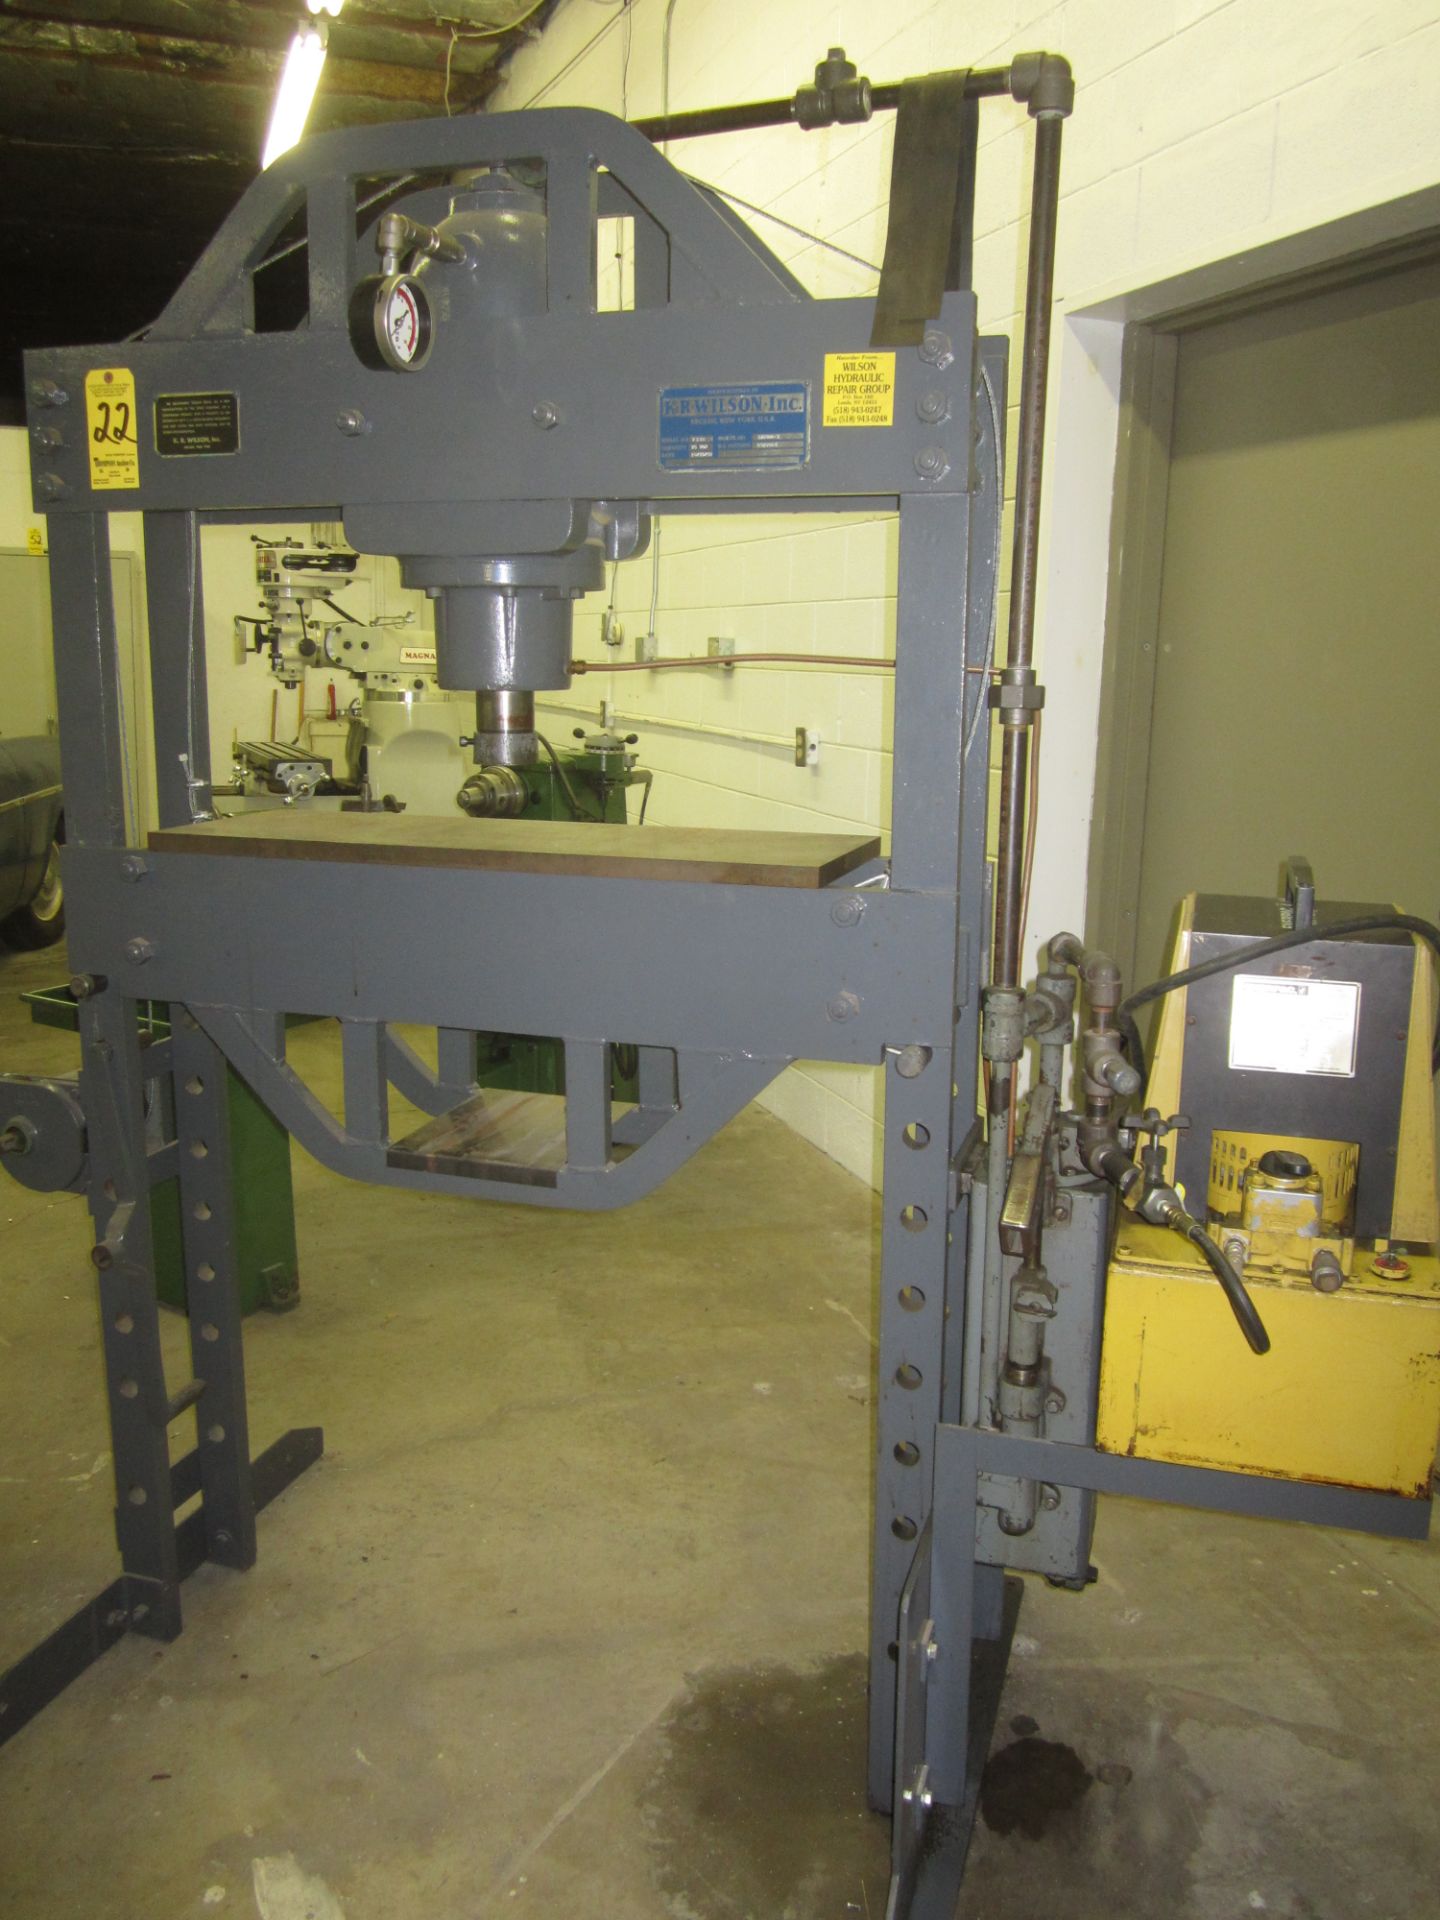 Wilson Model 37FMD-3 H-Frame Hydraulic Shop Press, SN 2336, 75 Ton Cap., with Enerpac Hydraulic - Image 2 of 6